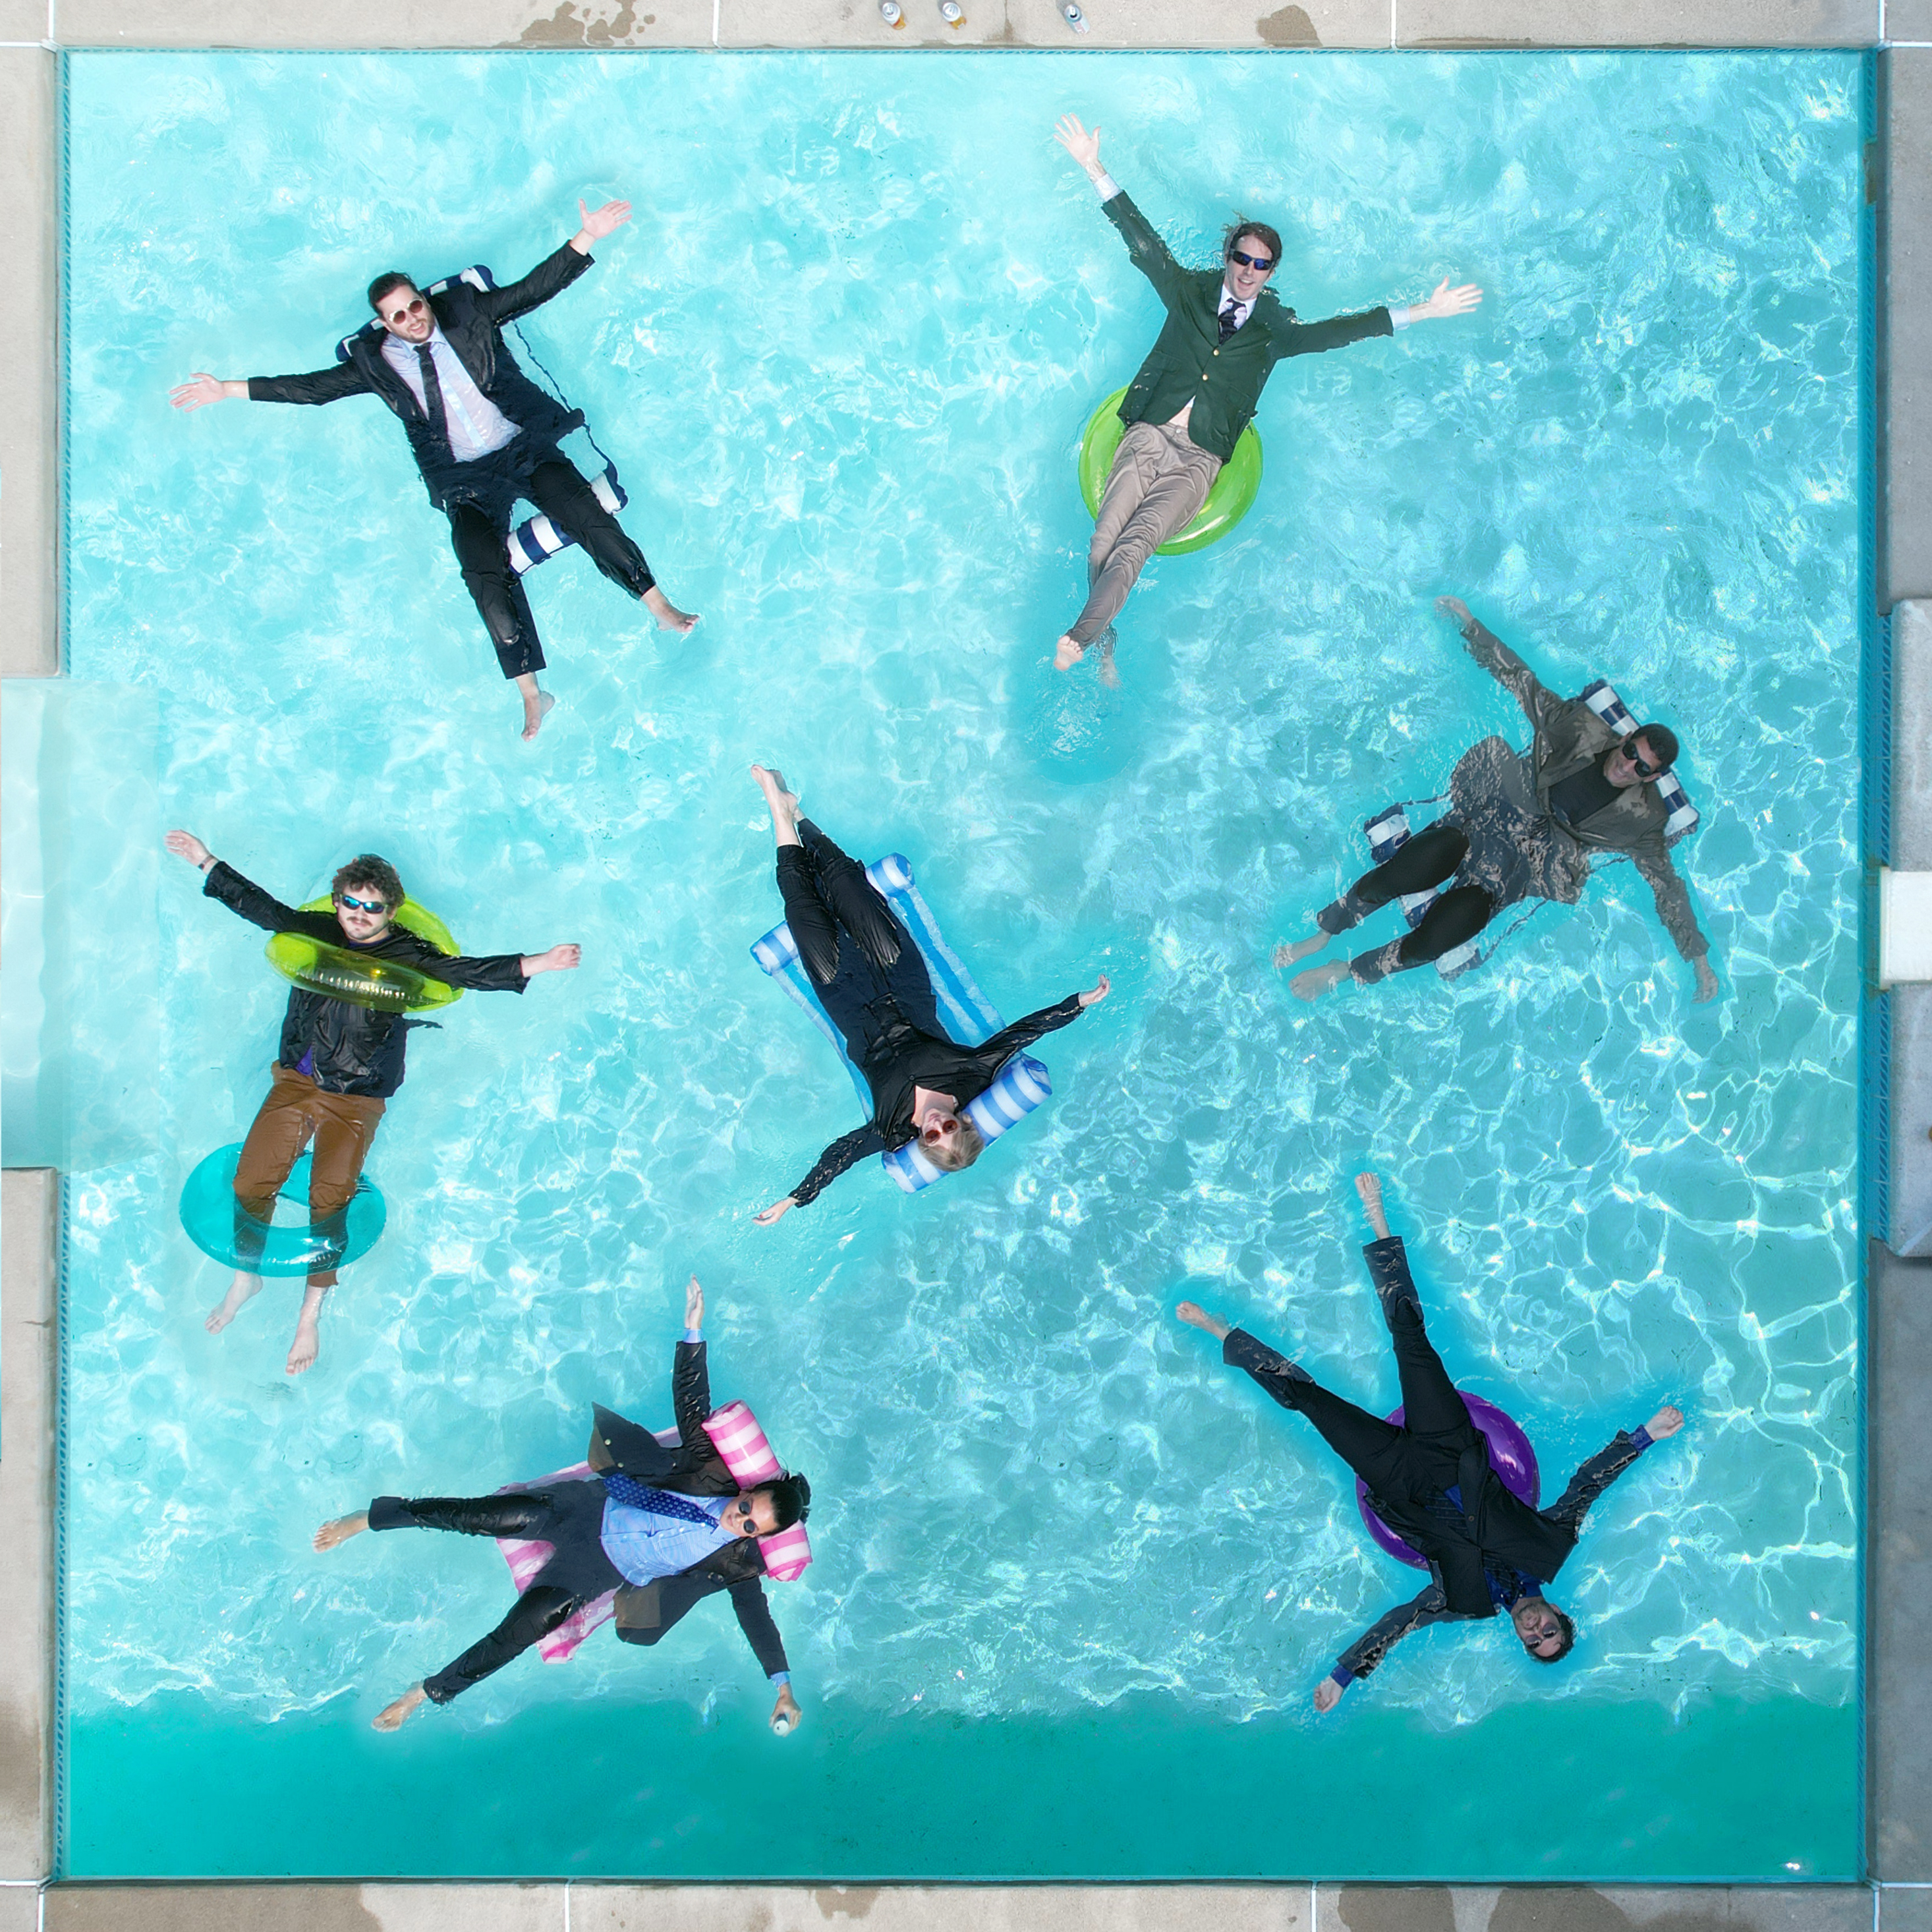 Keper Sauce Studios floating in a pool –photographed from overhead.